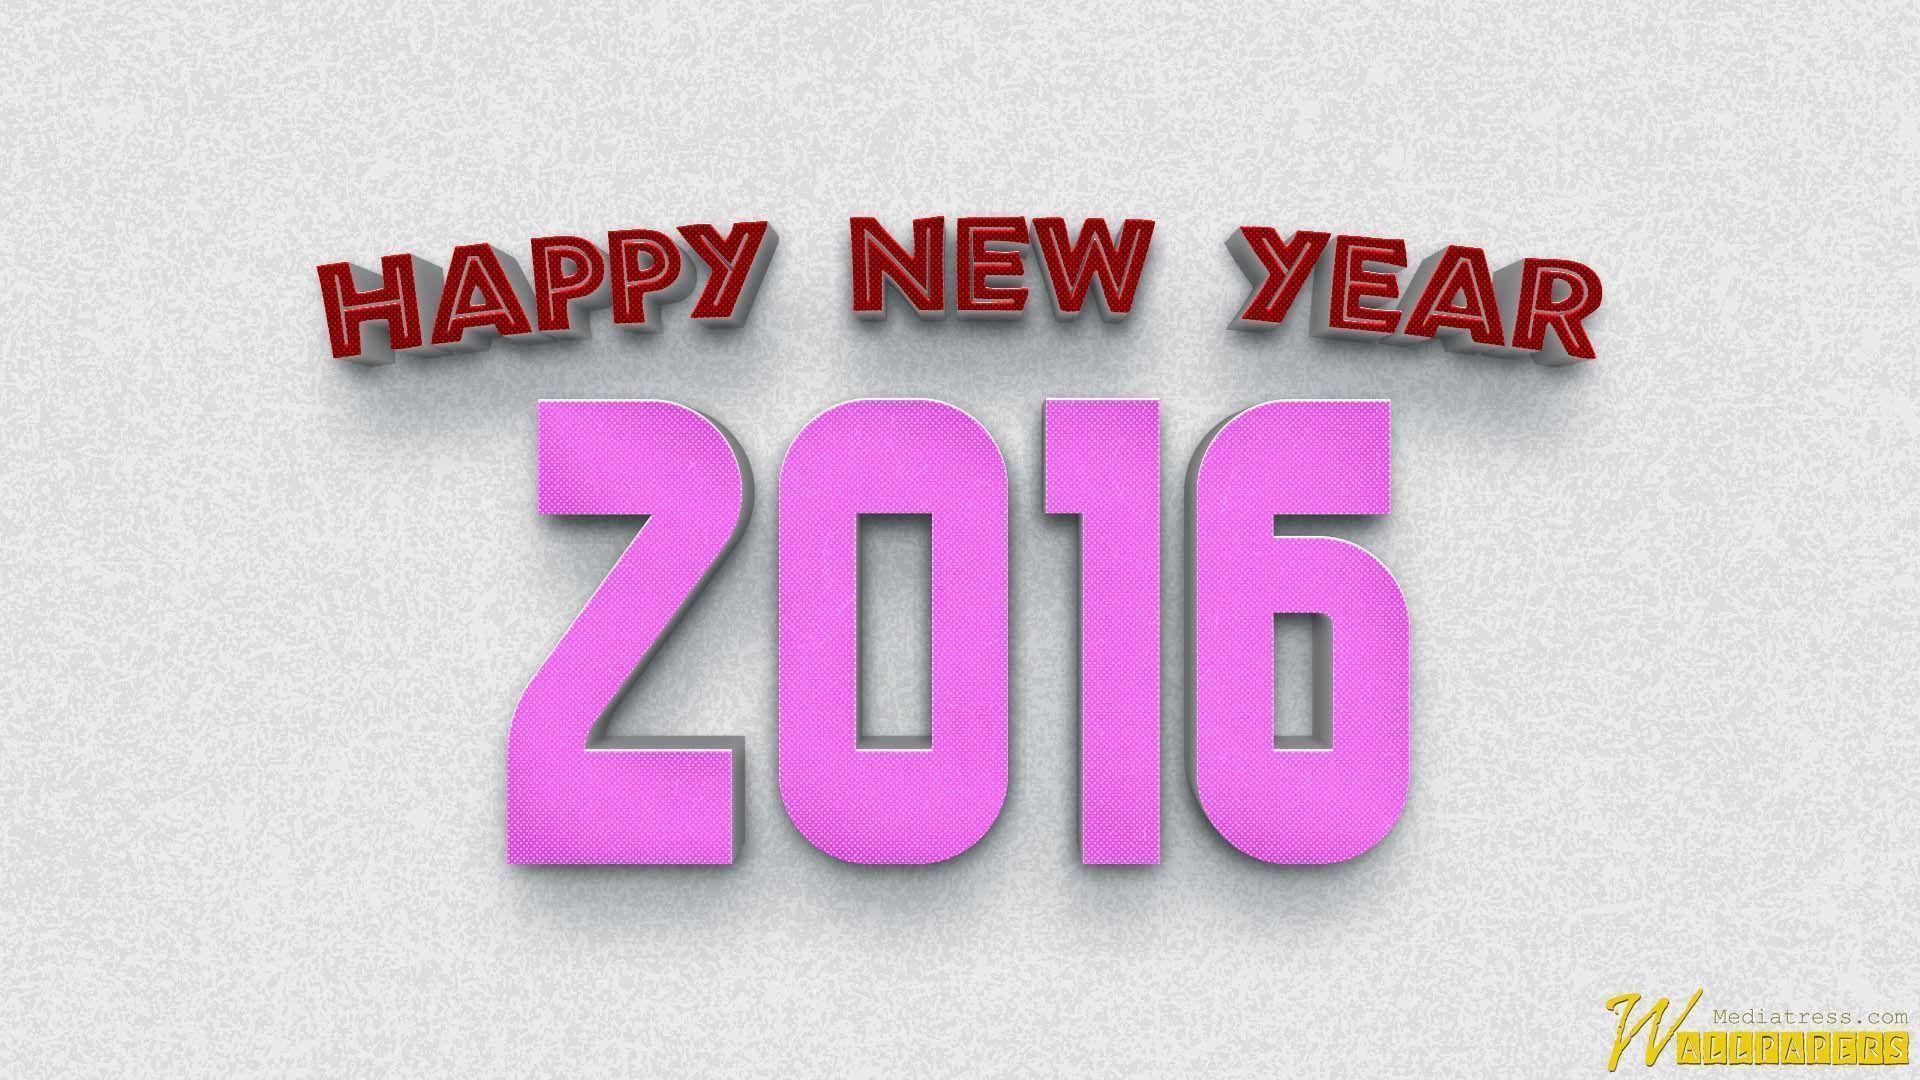 Awesome Happy New Year 2016 3D Greeting Cards Beautiful Picture